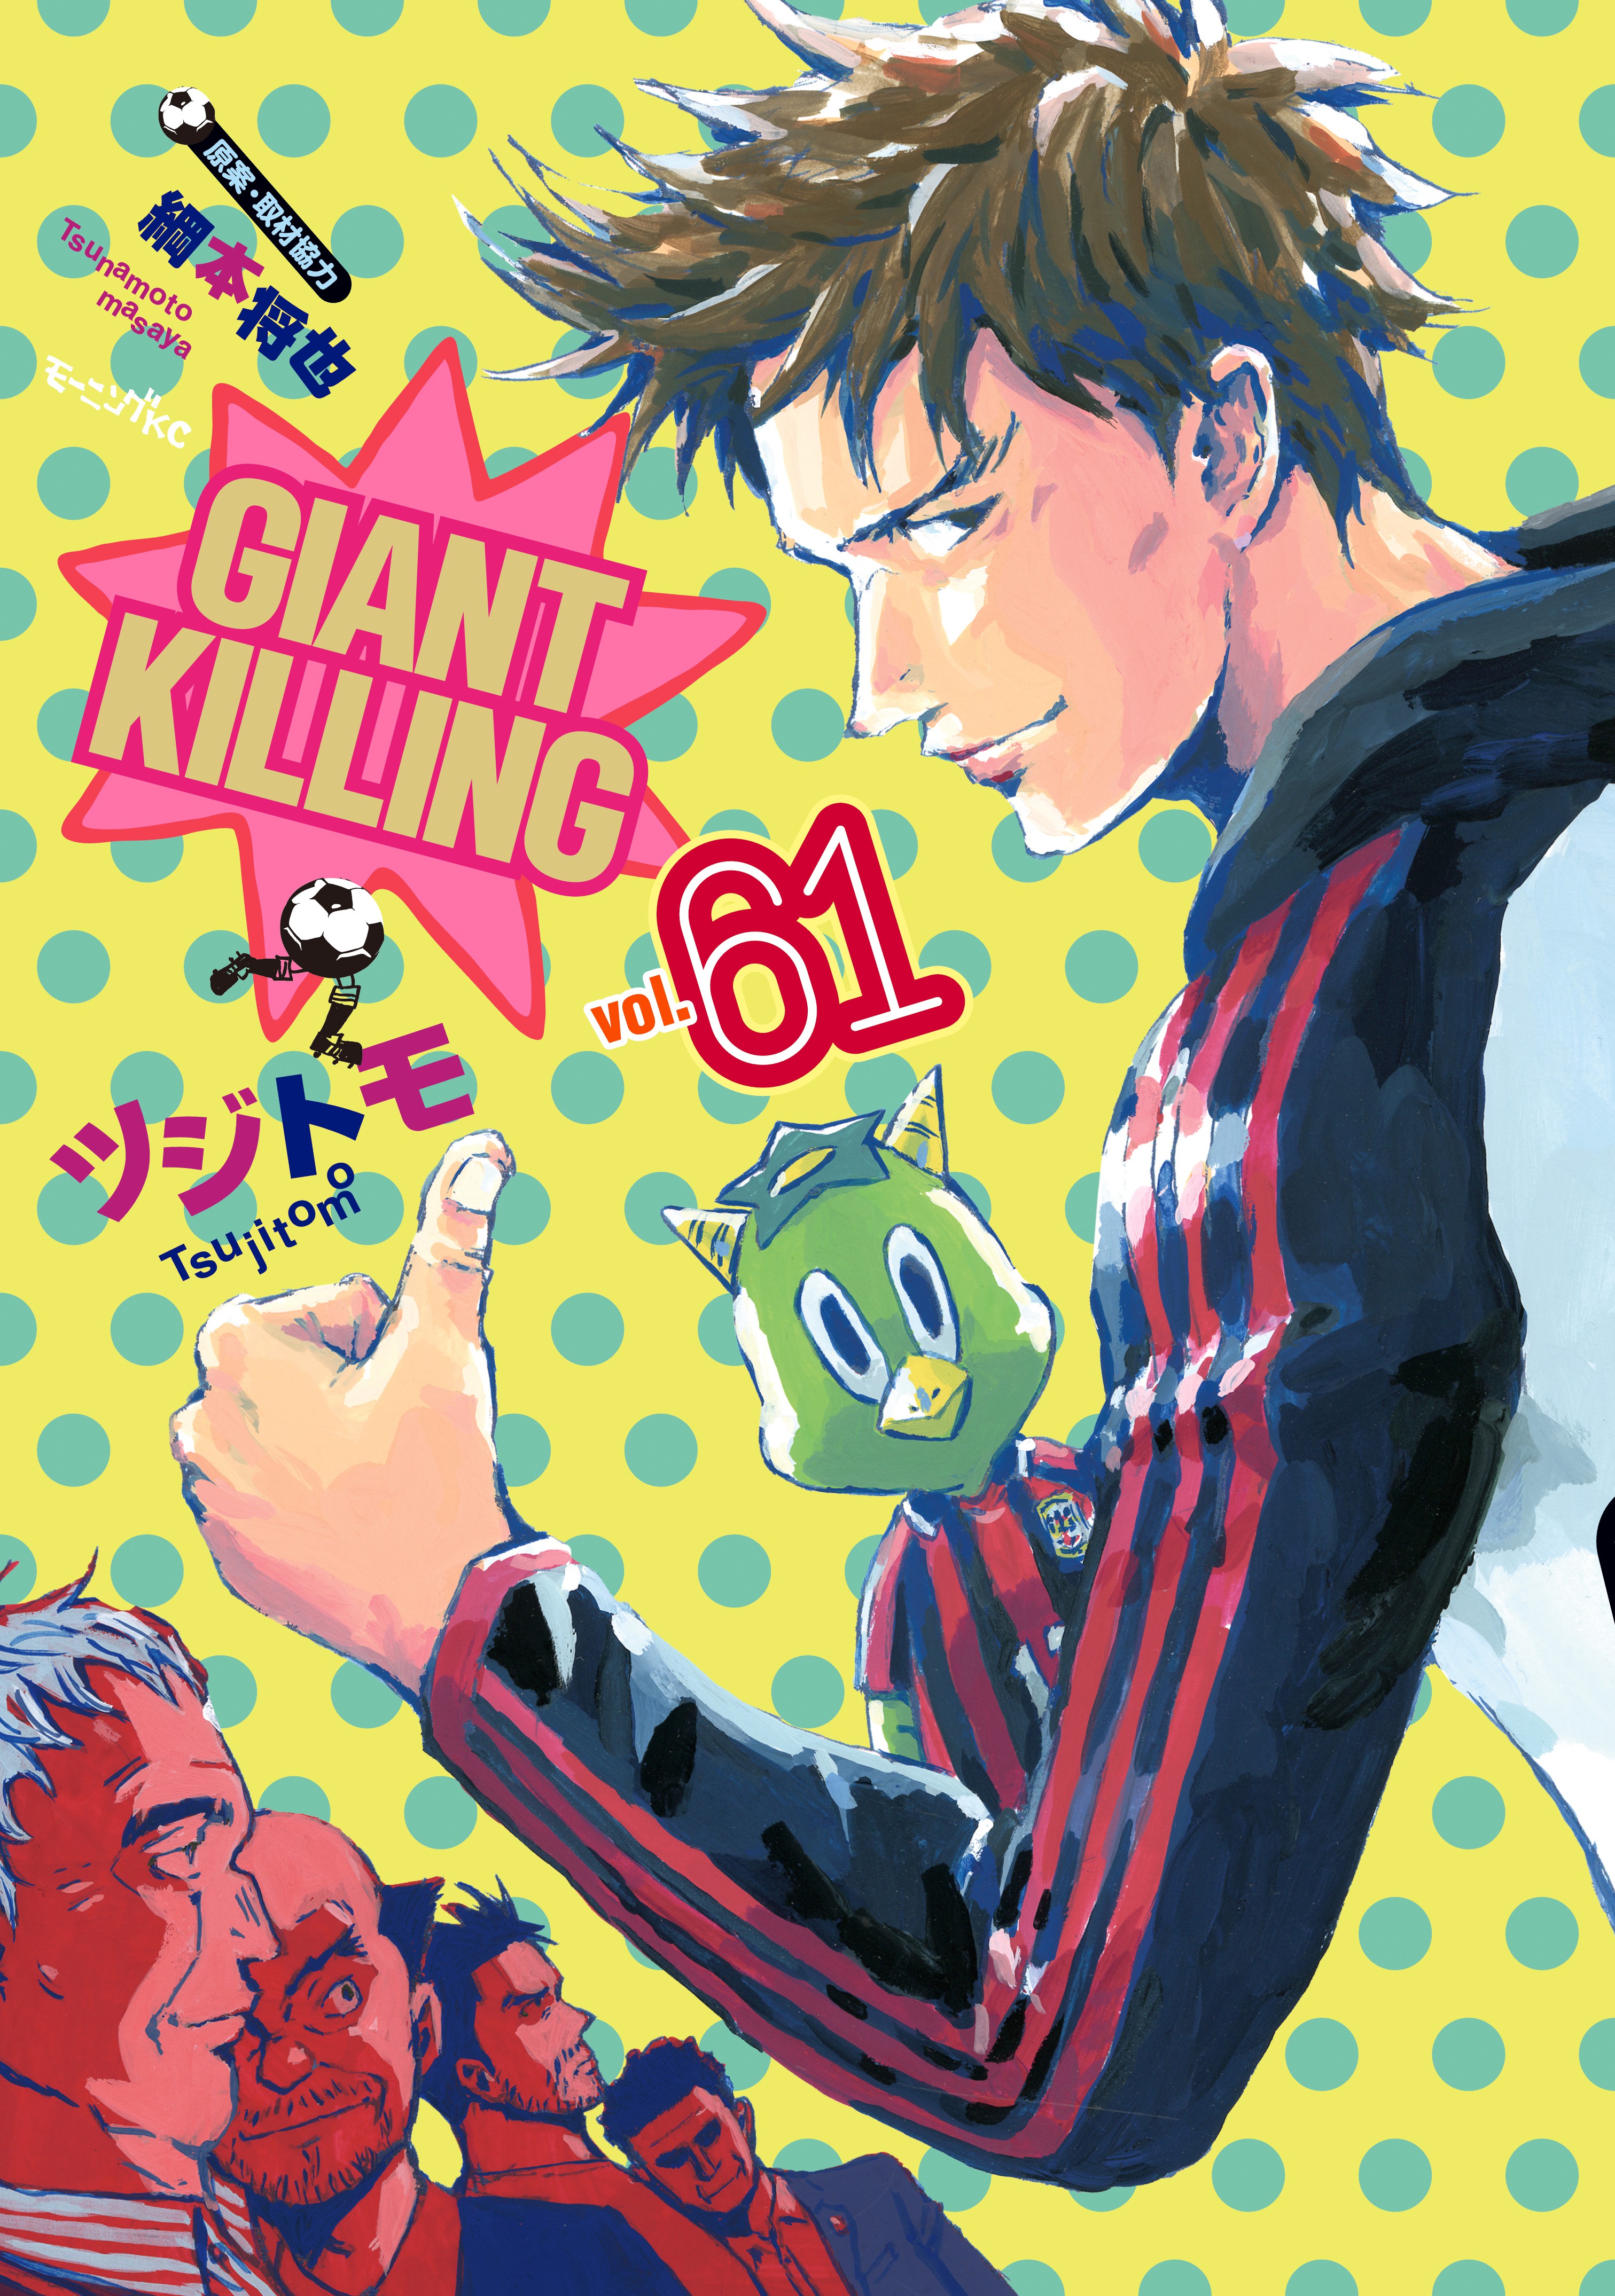 Giant killing capitulo 5, By Giant killing